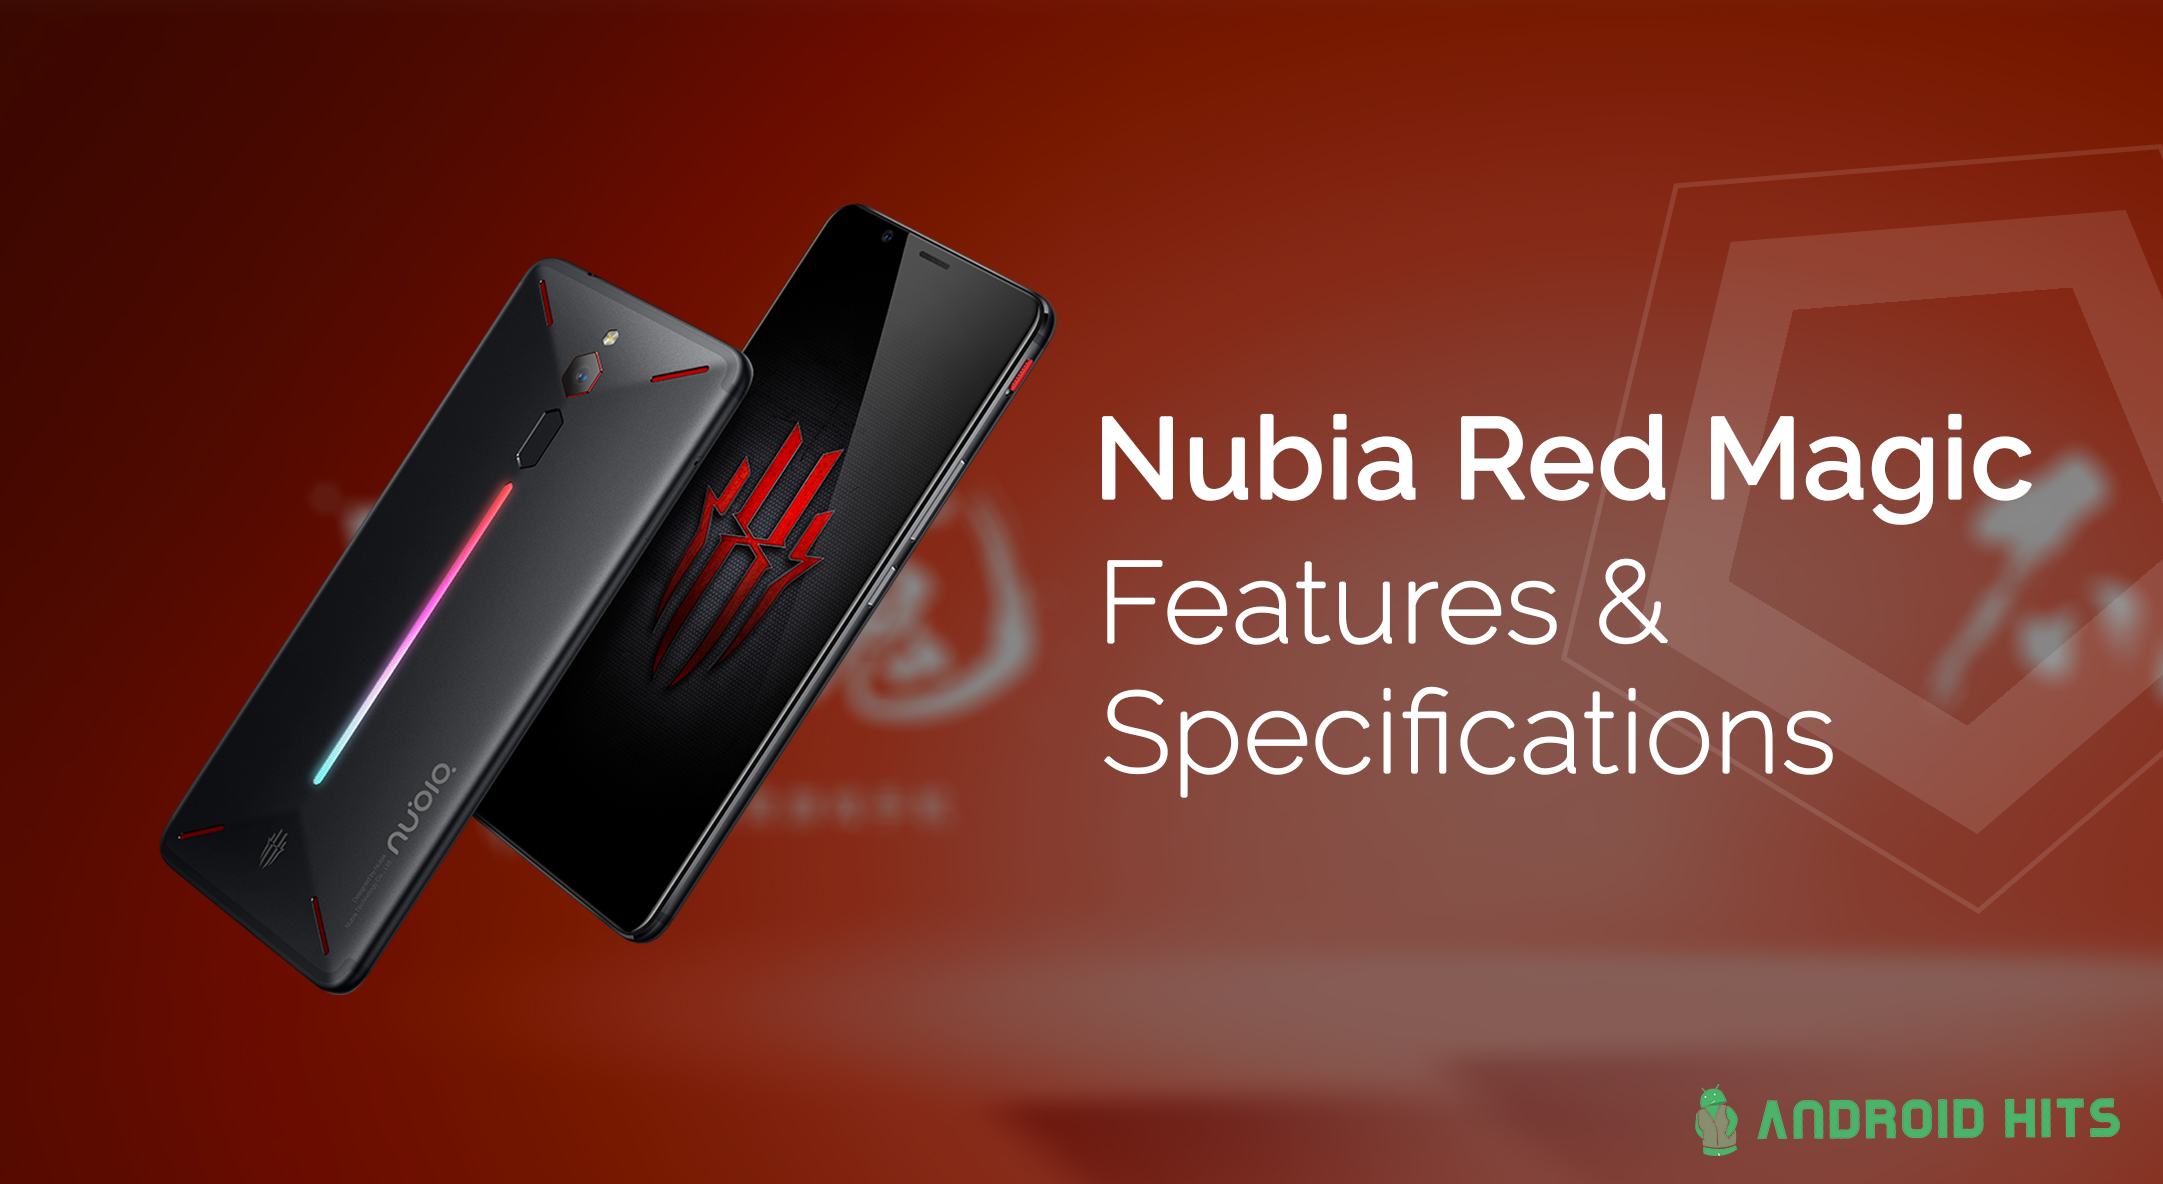 5) Nubia Red Magic Features and Specifications